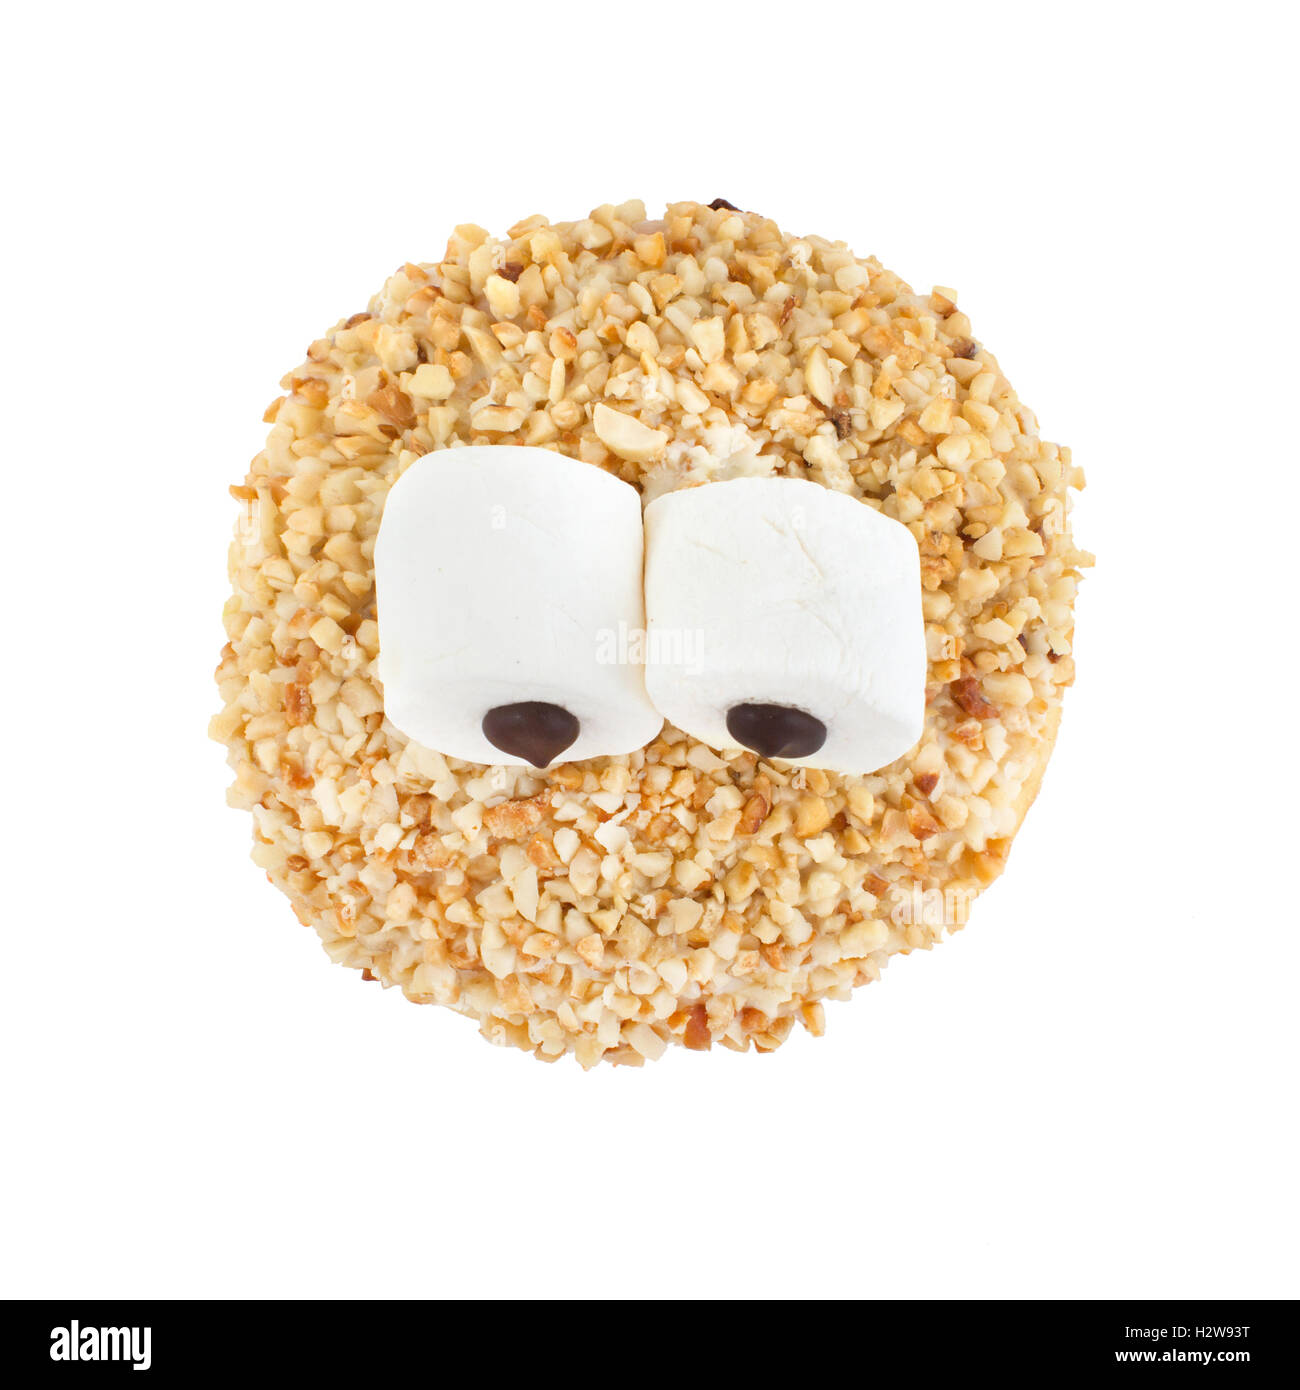 Donut sprinkled with nuts eye snout Stock Photo